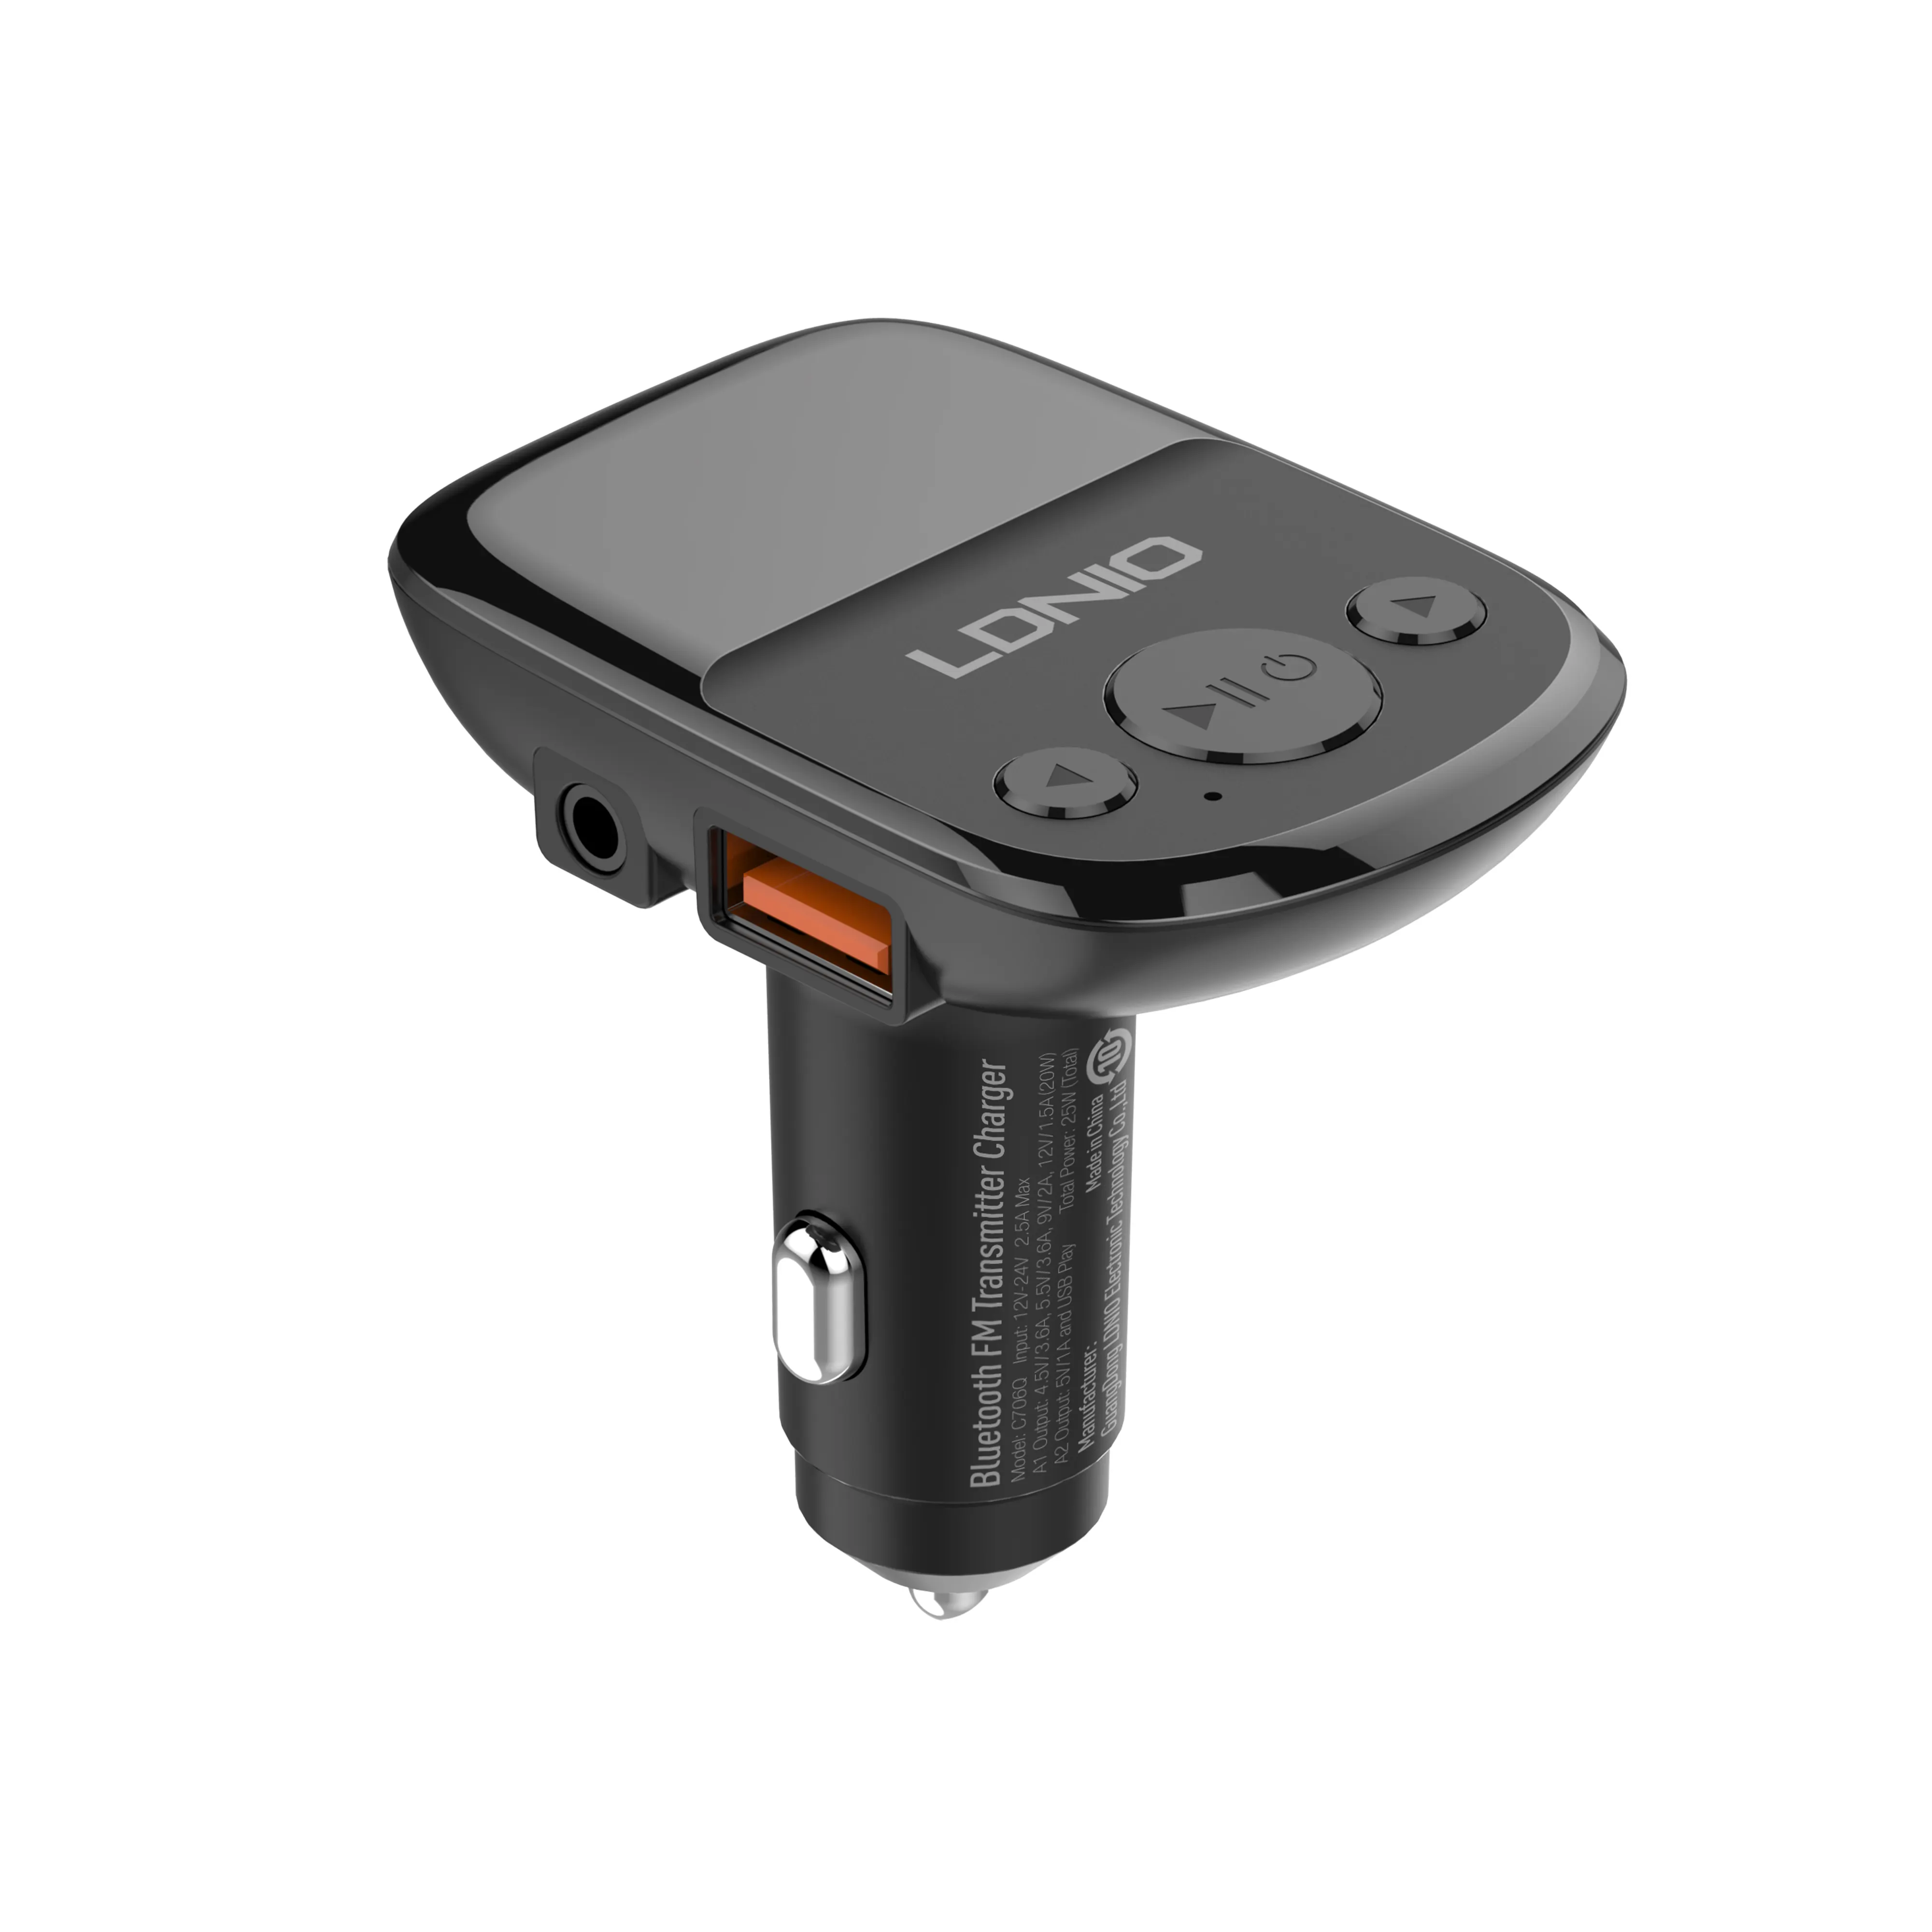 Ldnio C706Q Hot Sell Quick Charging For Iphone Pd Qc Fast Car Charger Handfree Call FM Transmitter In Car Charger